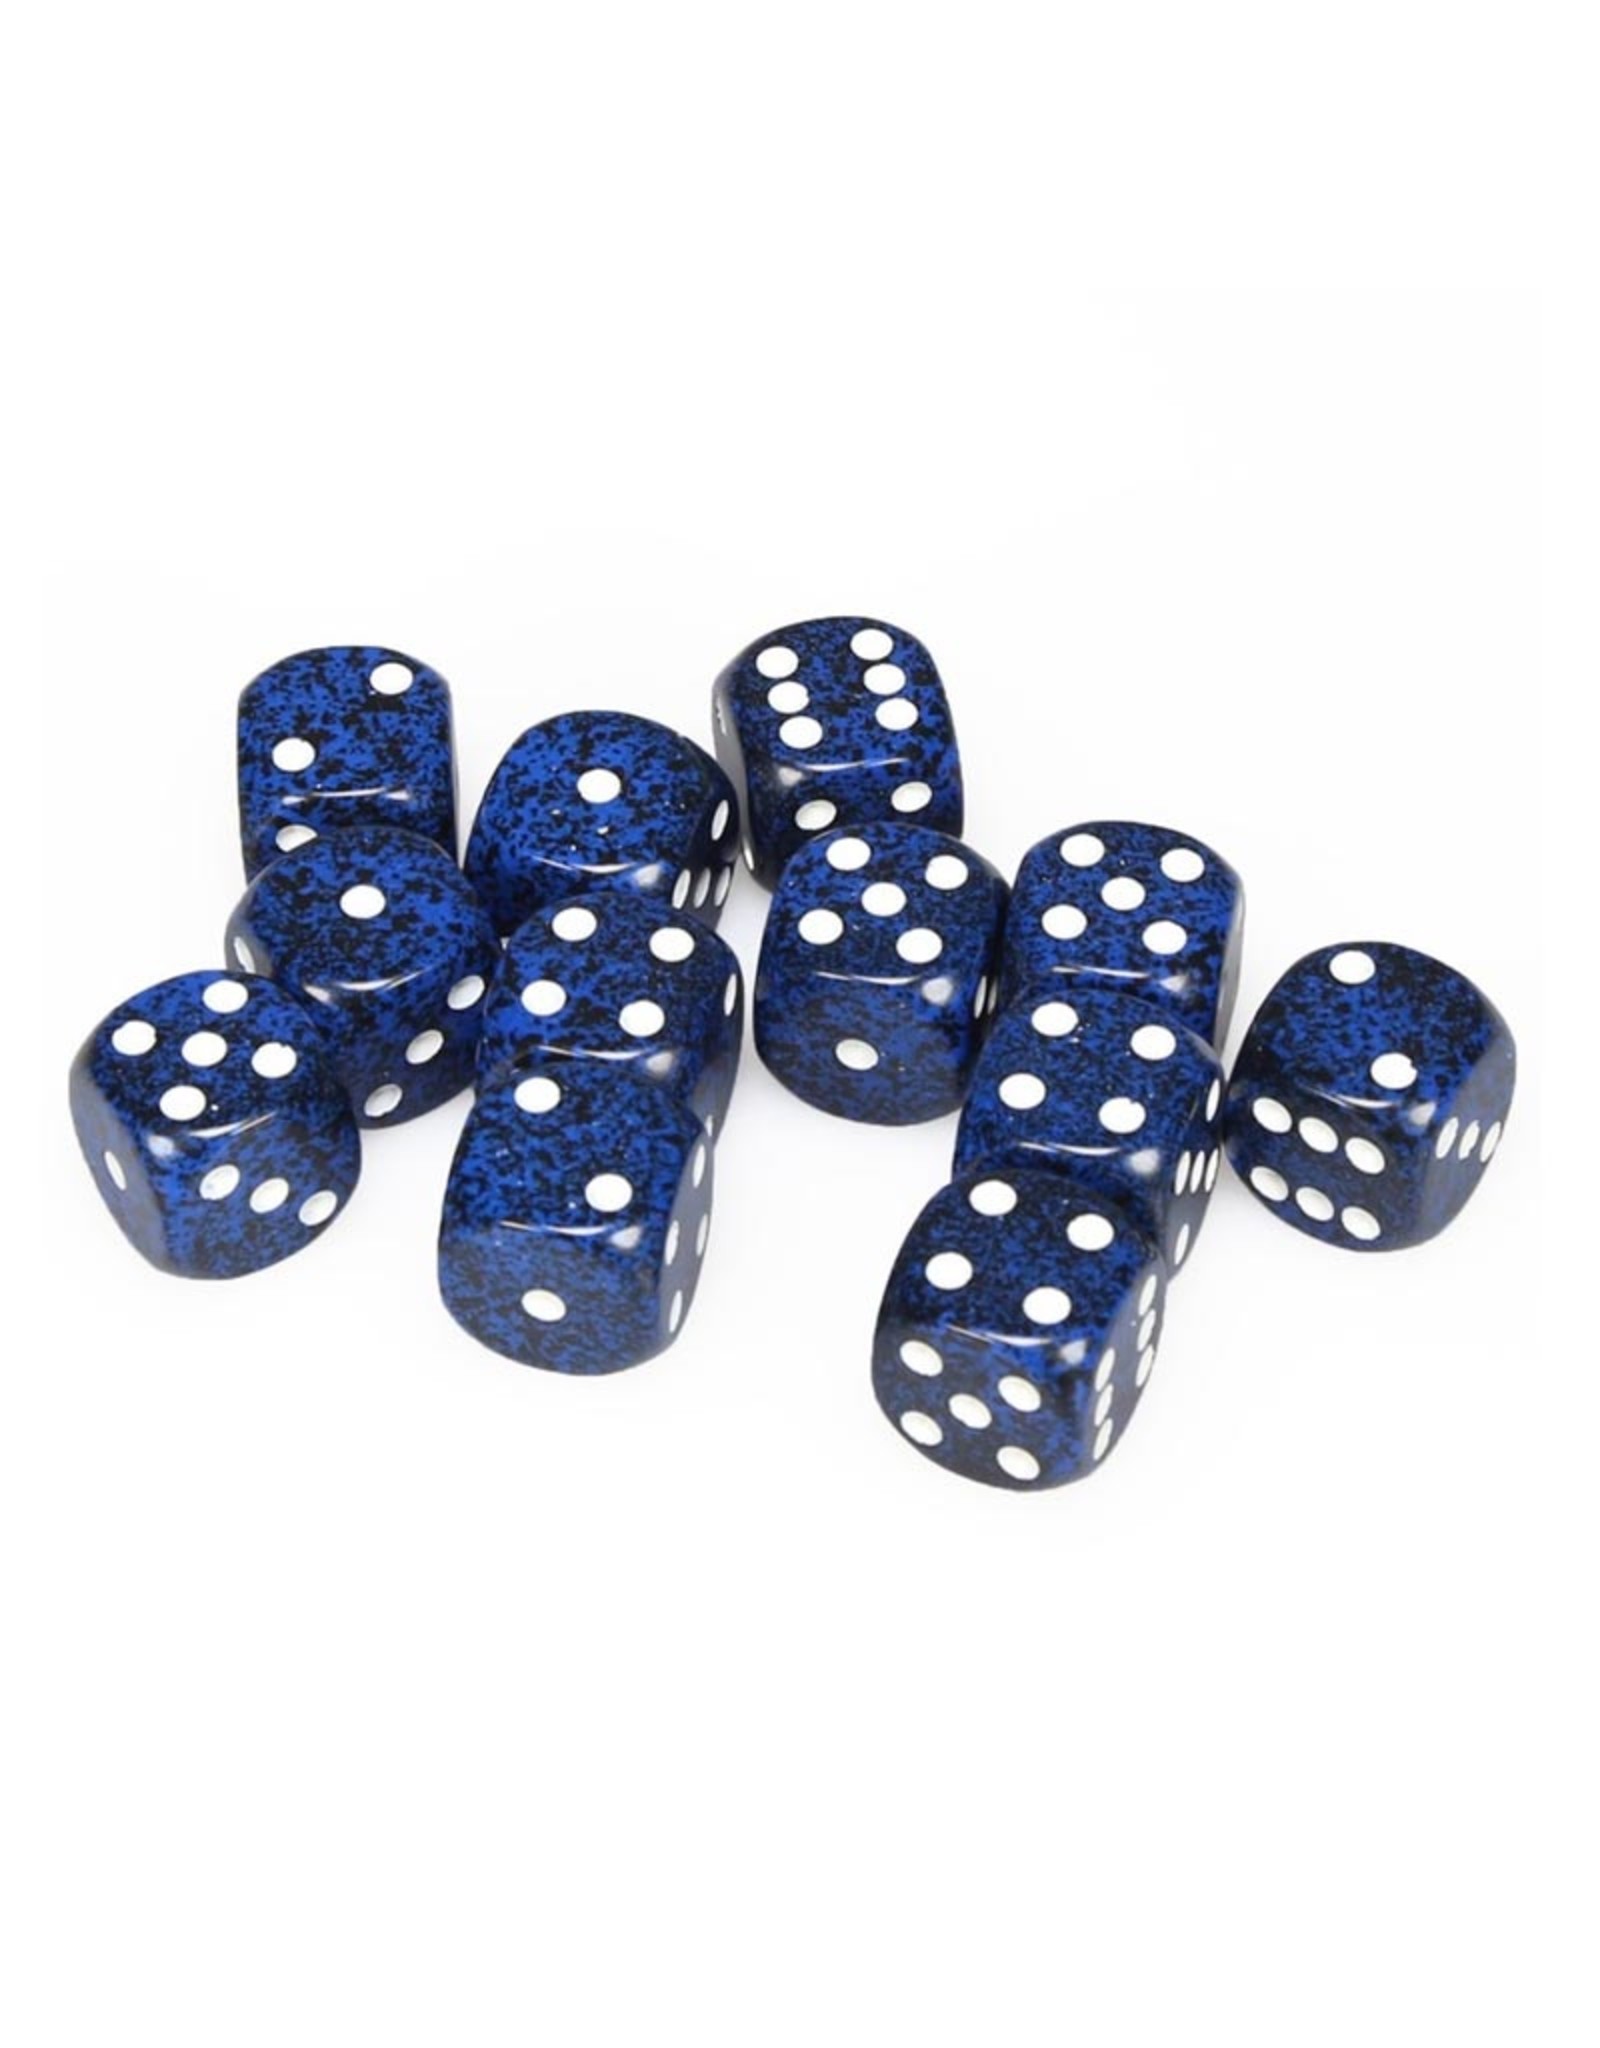 Chessex 16MM D6 Dice Set CHX25746 Speckled Stealth